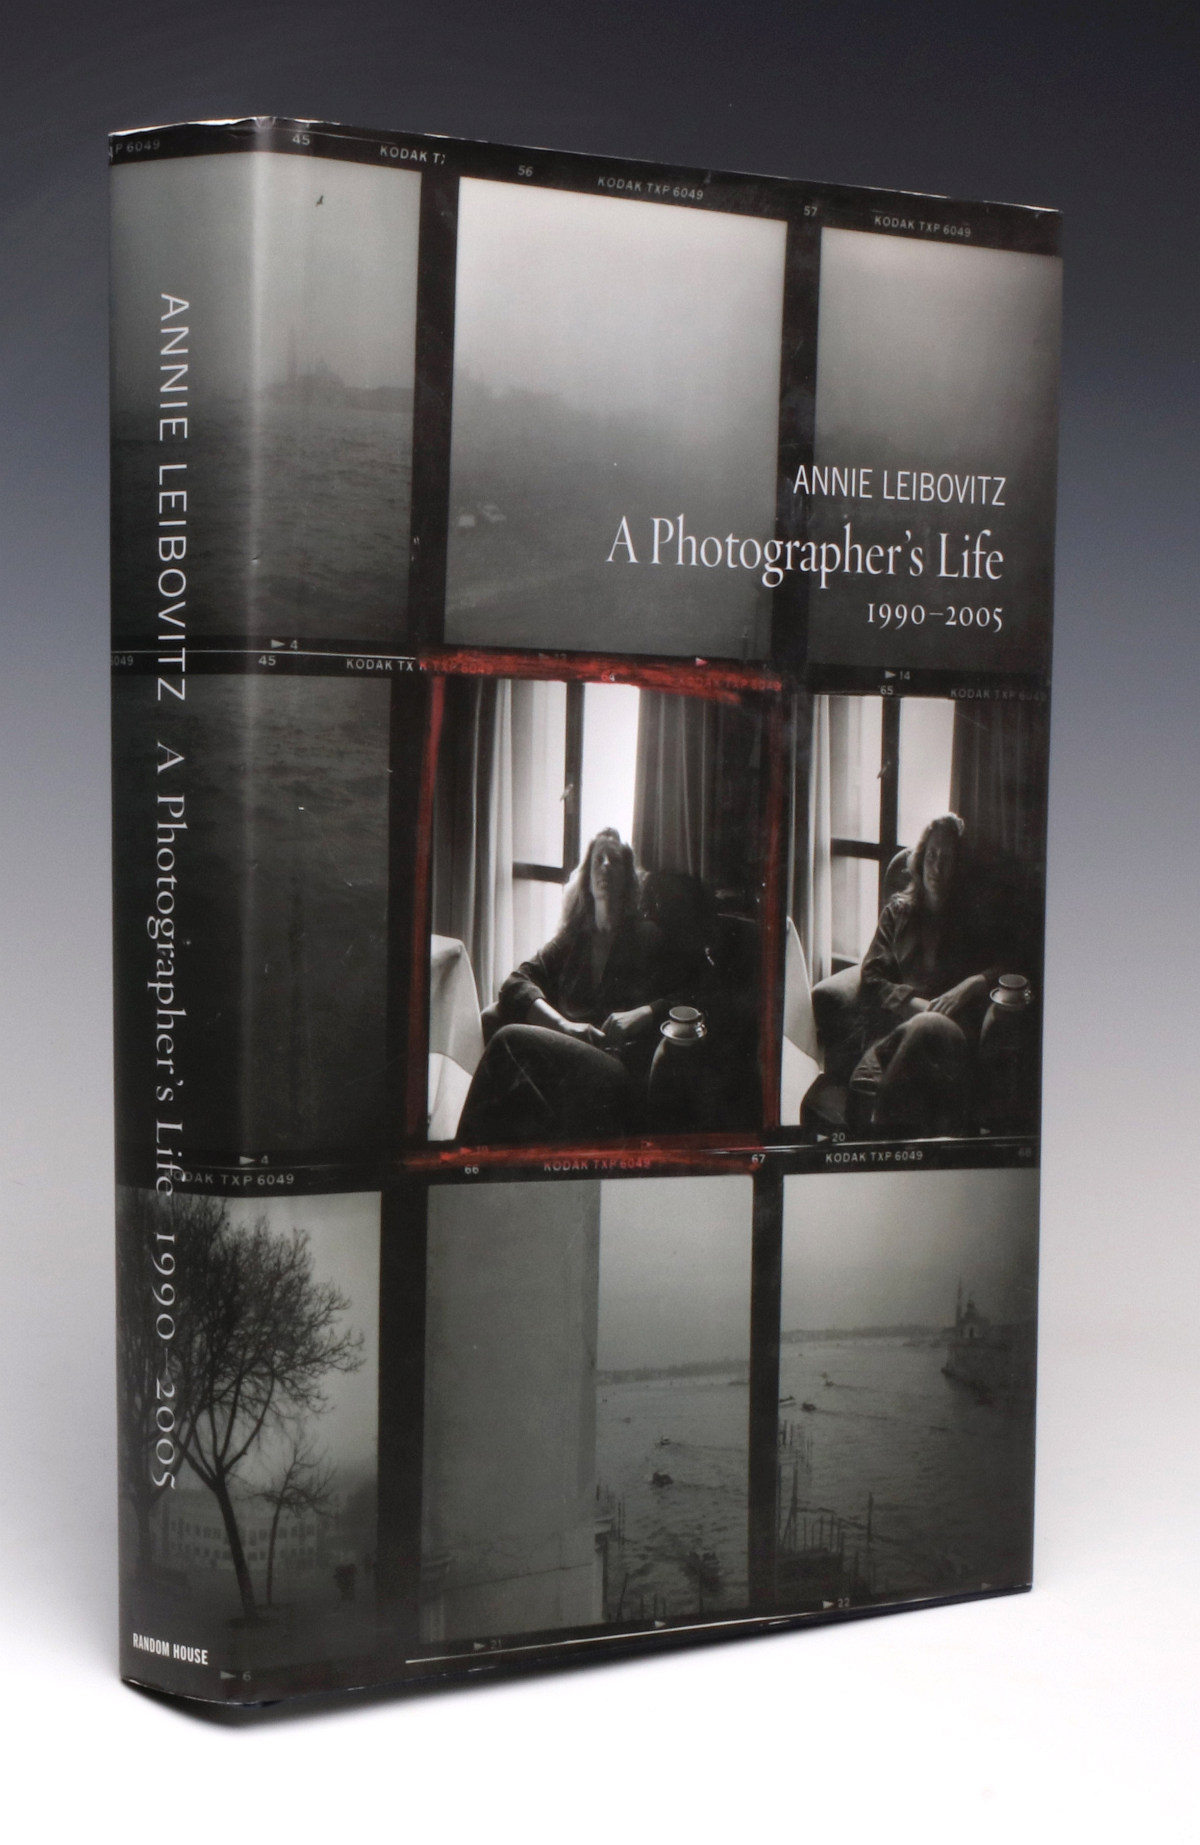 SIGNED ANNIE LEIBOVITZ 'A PHOTOGRAPHER'S LIFE'